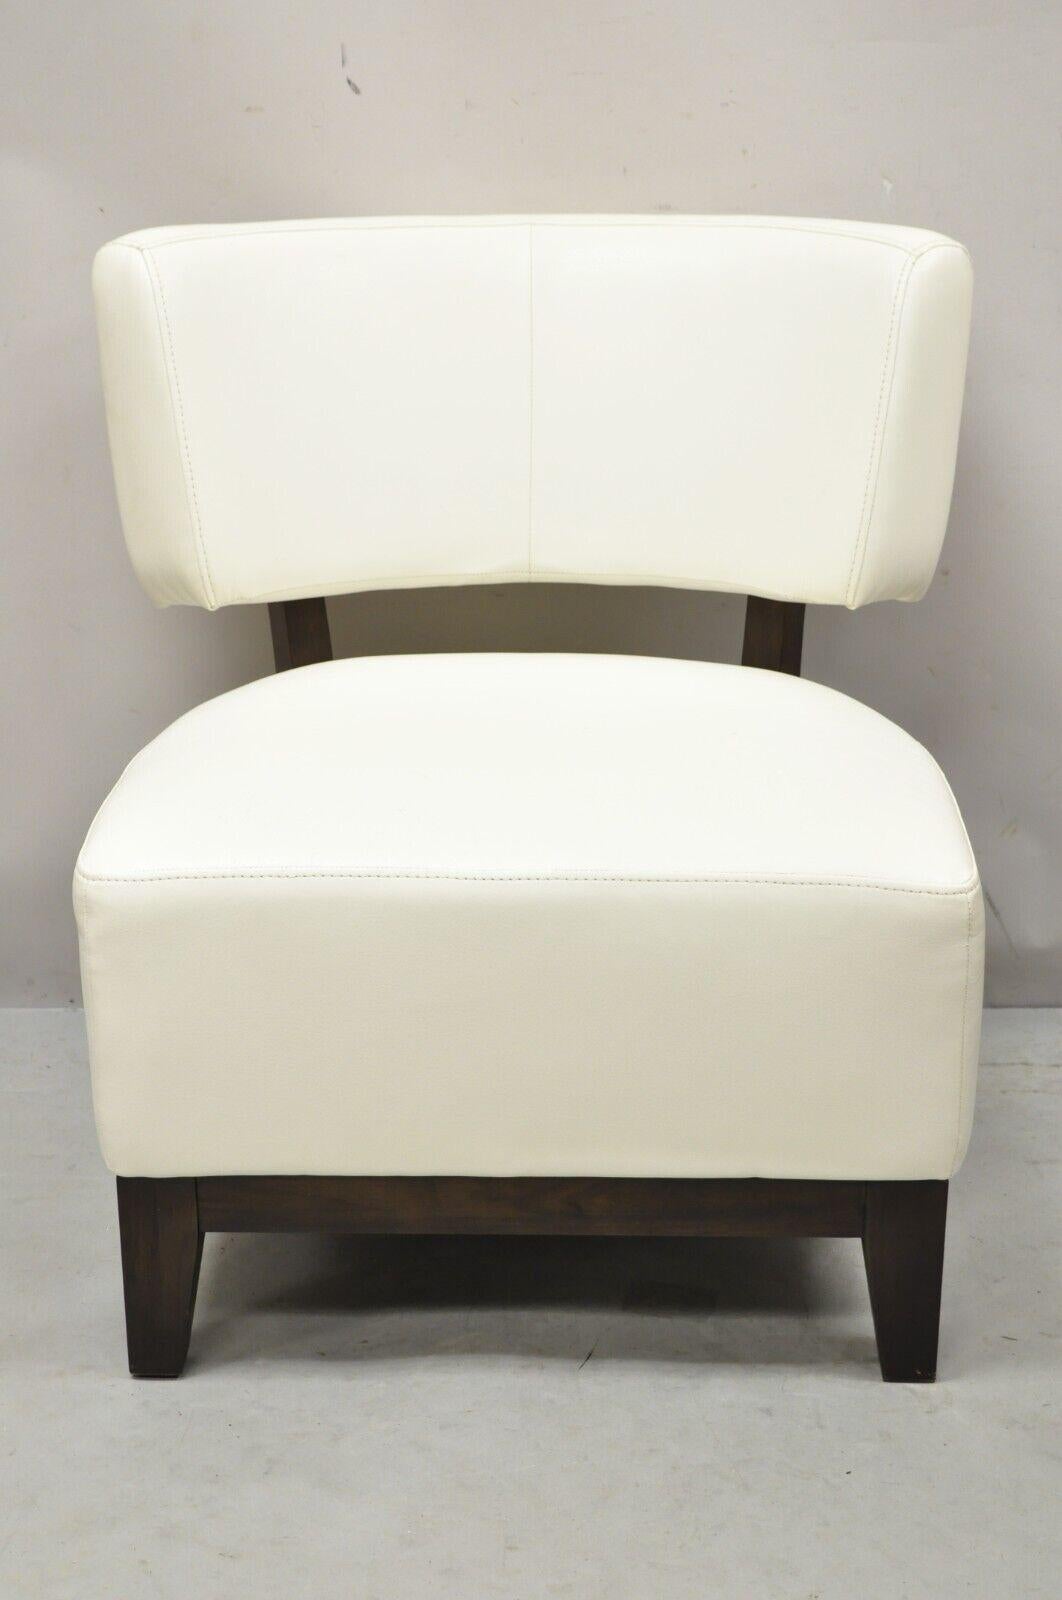 Modern decorator white vinyl barrel back club lounge slipper chair. Item features white vinyl upholstery, solid wood frame, clean modernist lines, great style and form. Circa Late 20th to Early 21st Century. Measurements: 30.5